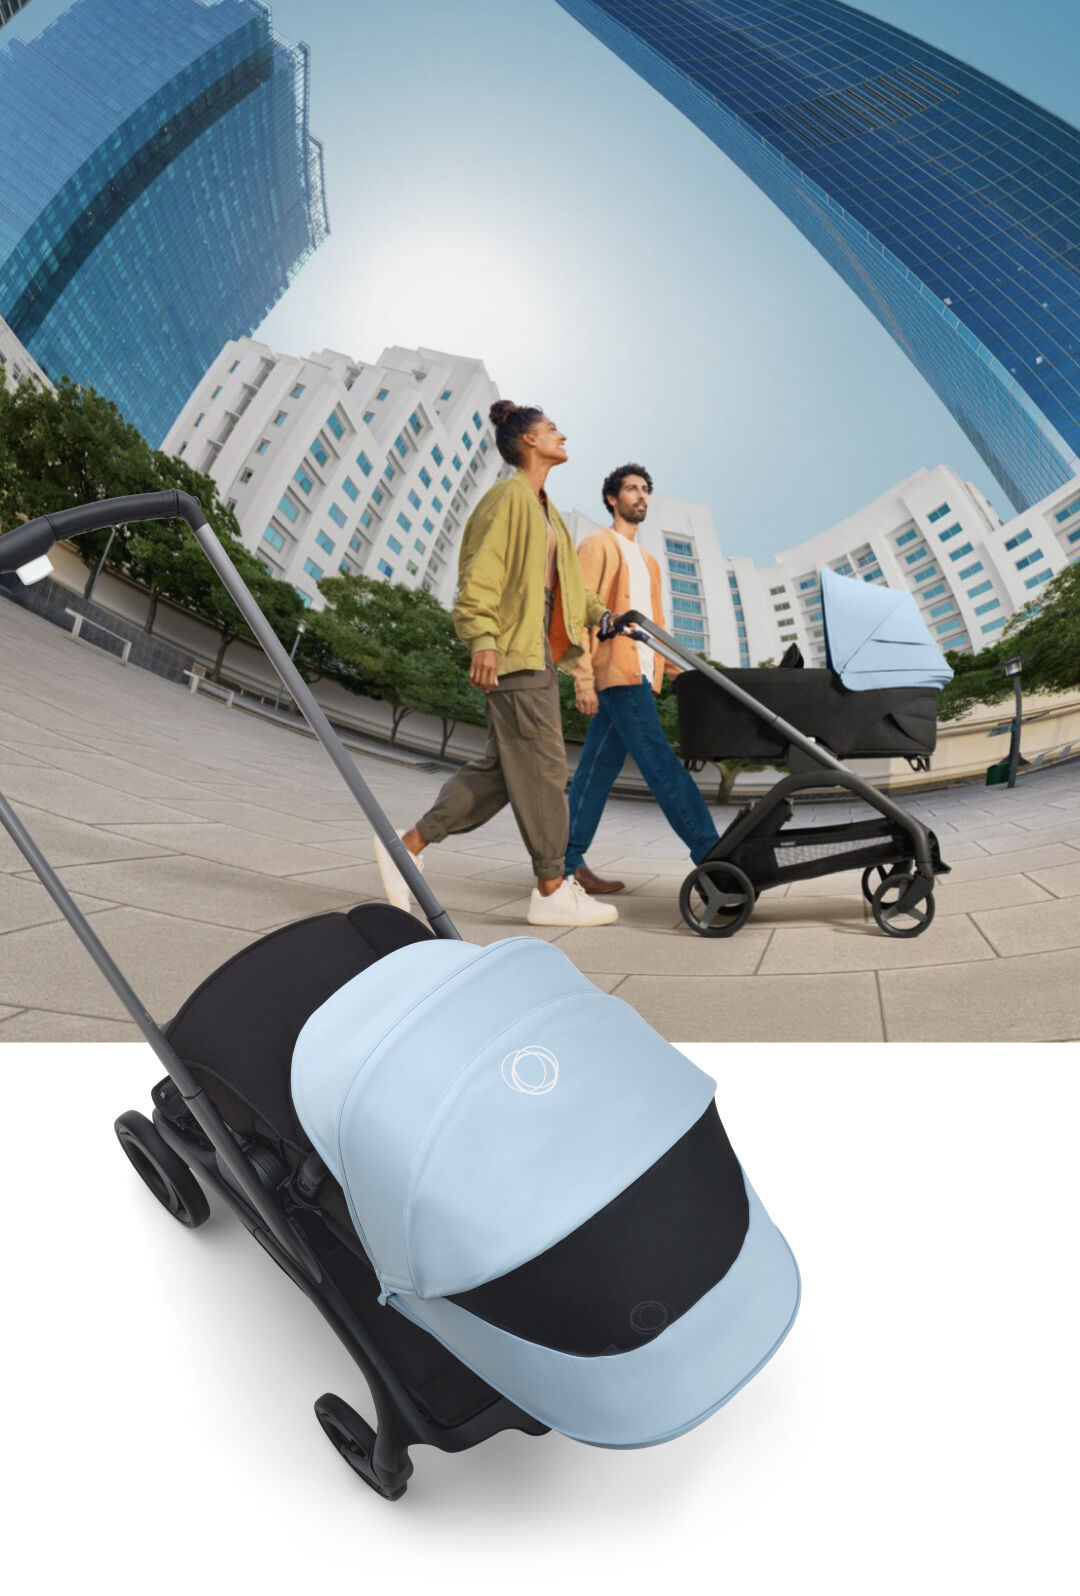 Two overlapping images; one is of parents leisurely strolling through the city with their Bugaboo Dragonfly pushchair, the other is a top-down view of the Bugaboo Dragonfly.